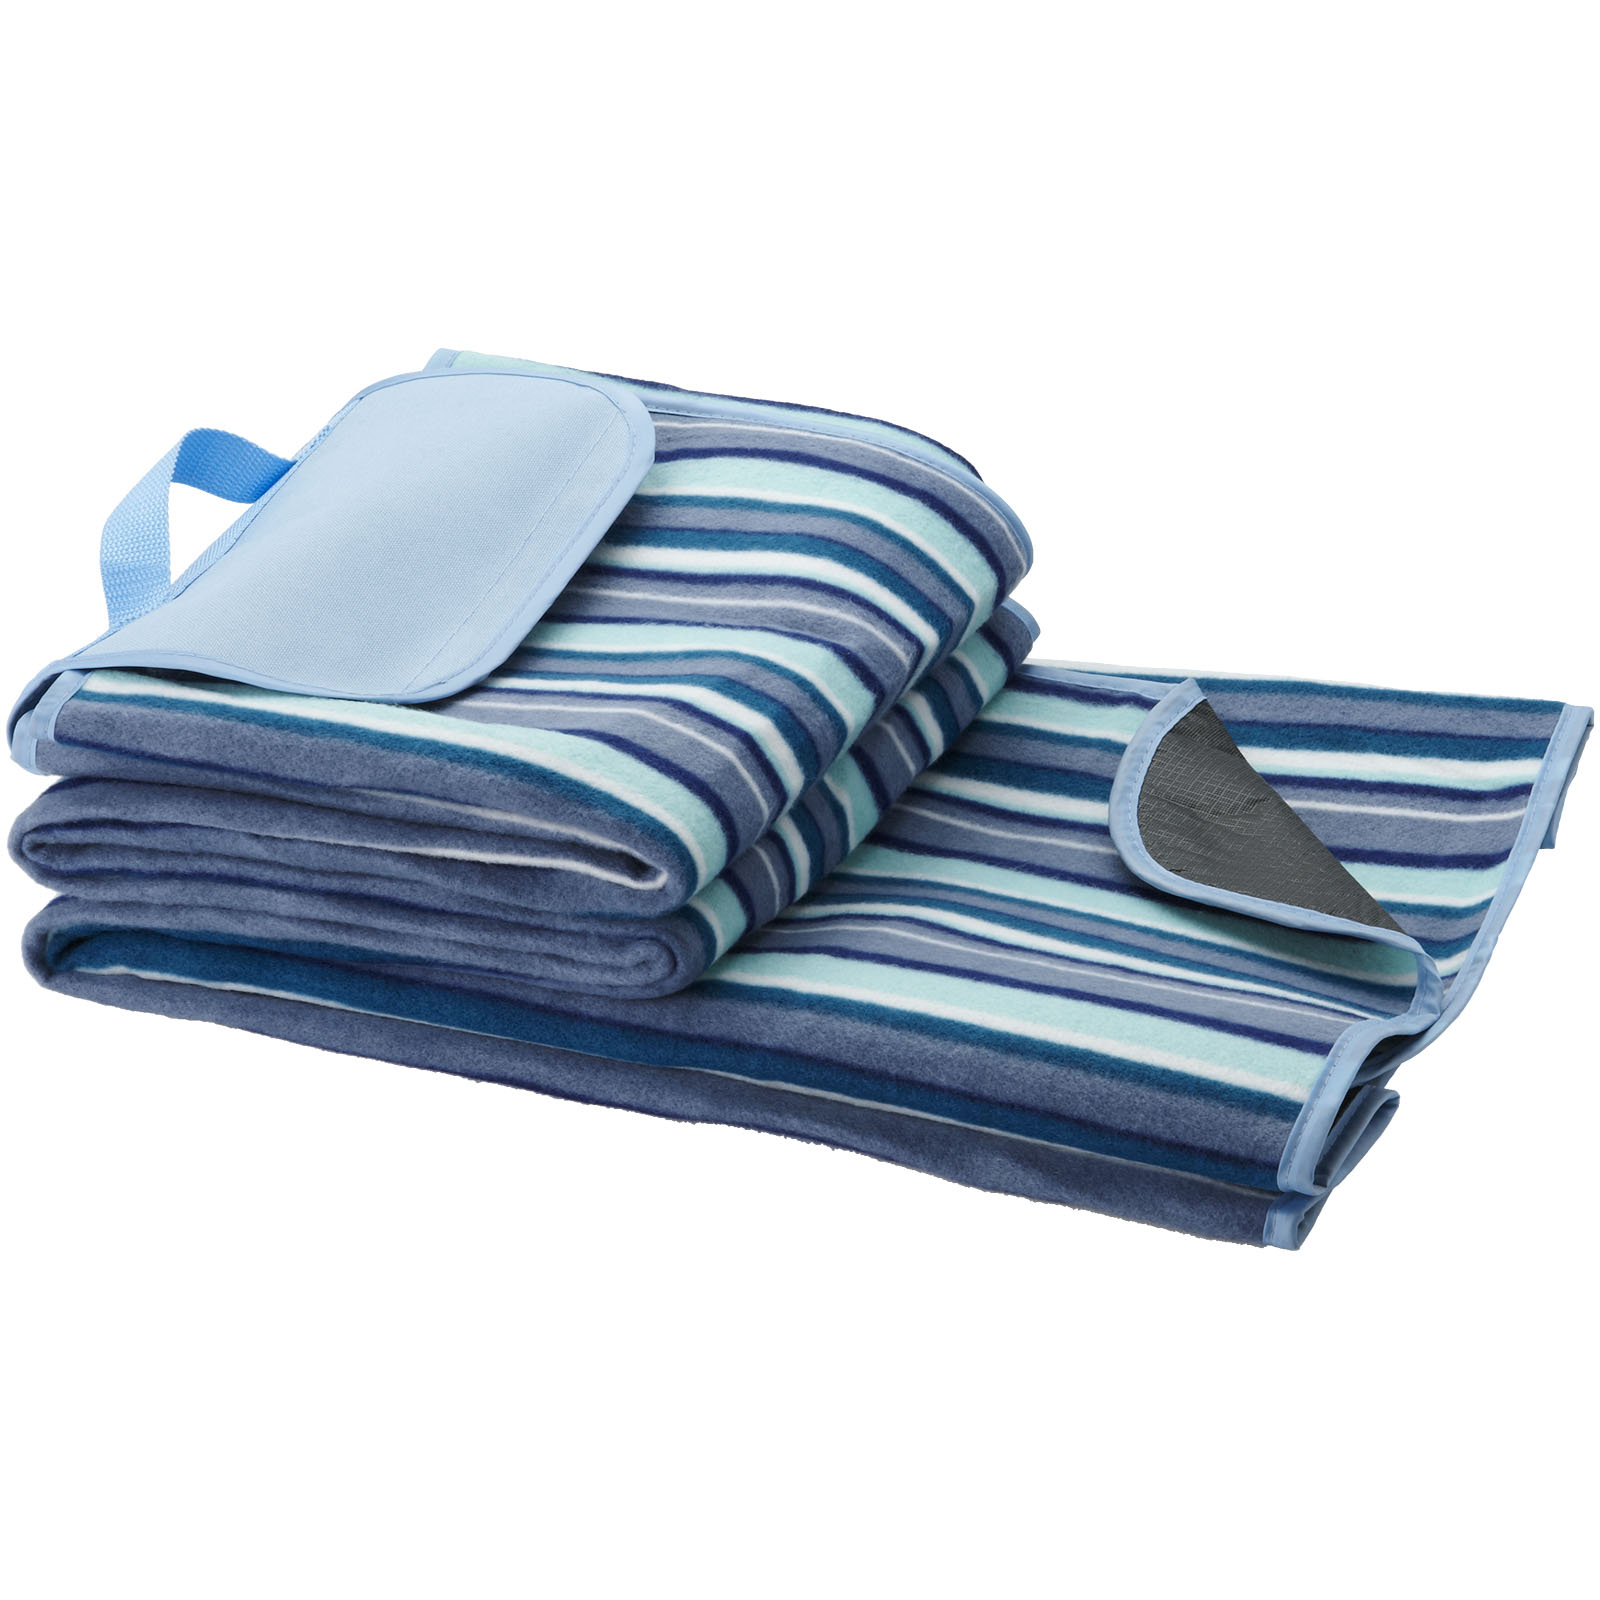 Sports & Leisure - Riviera water-resistant outdoor picnic blanket